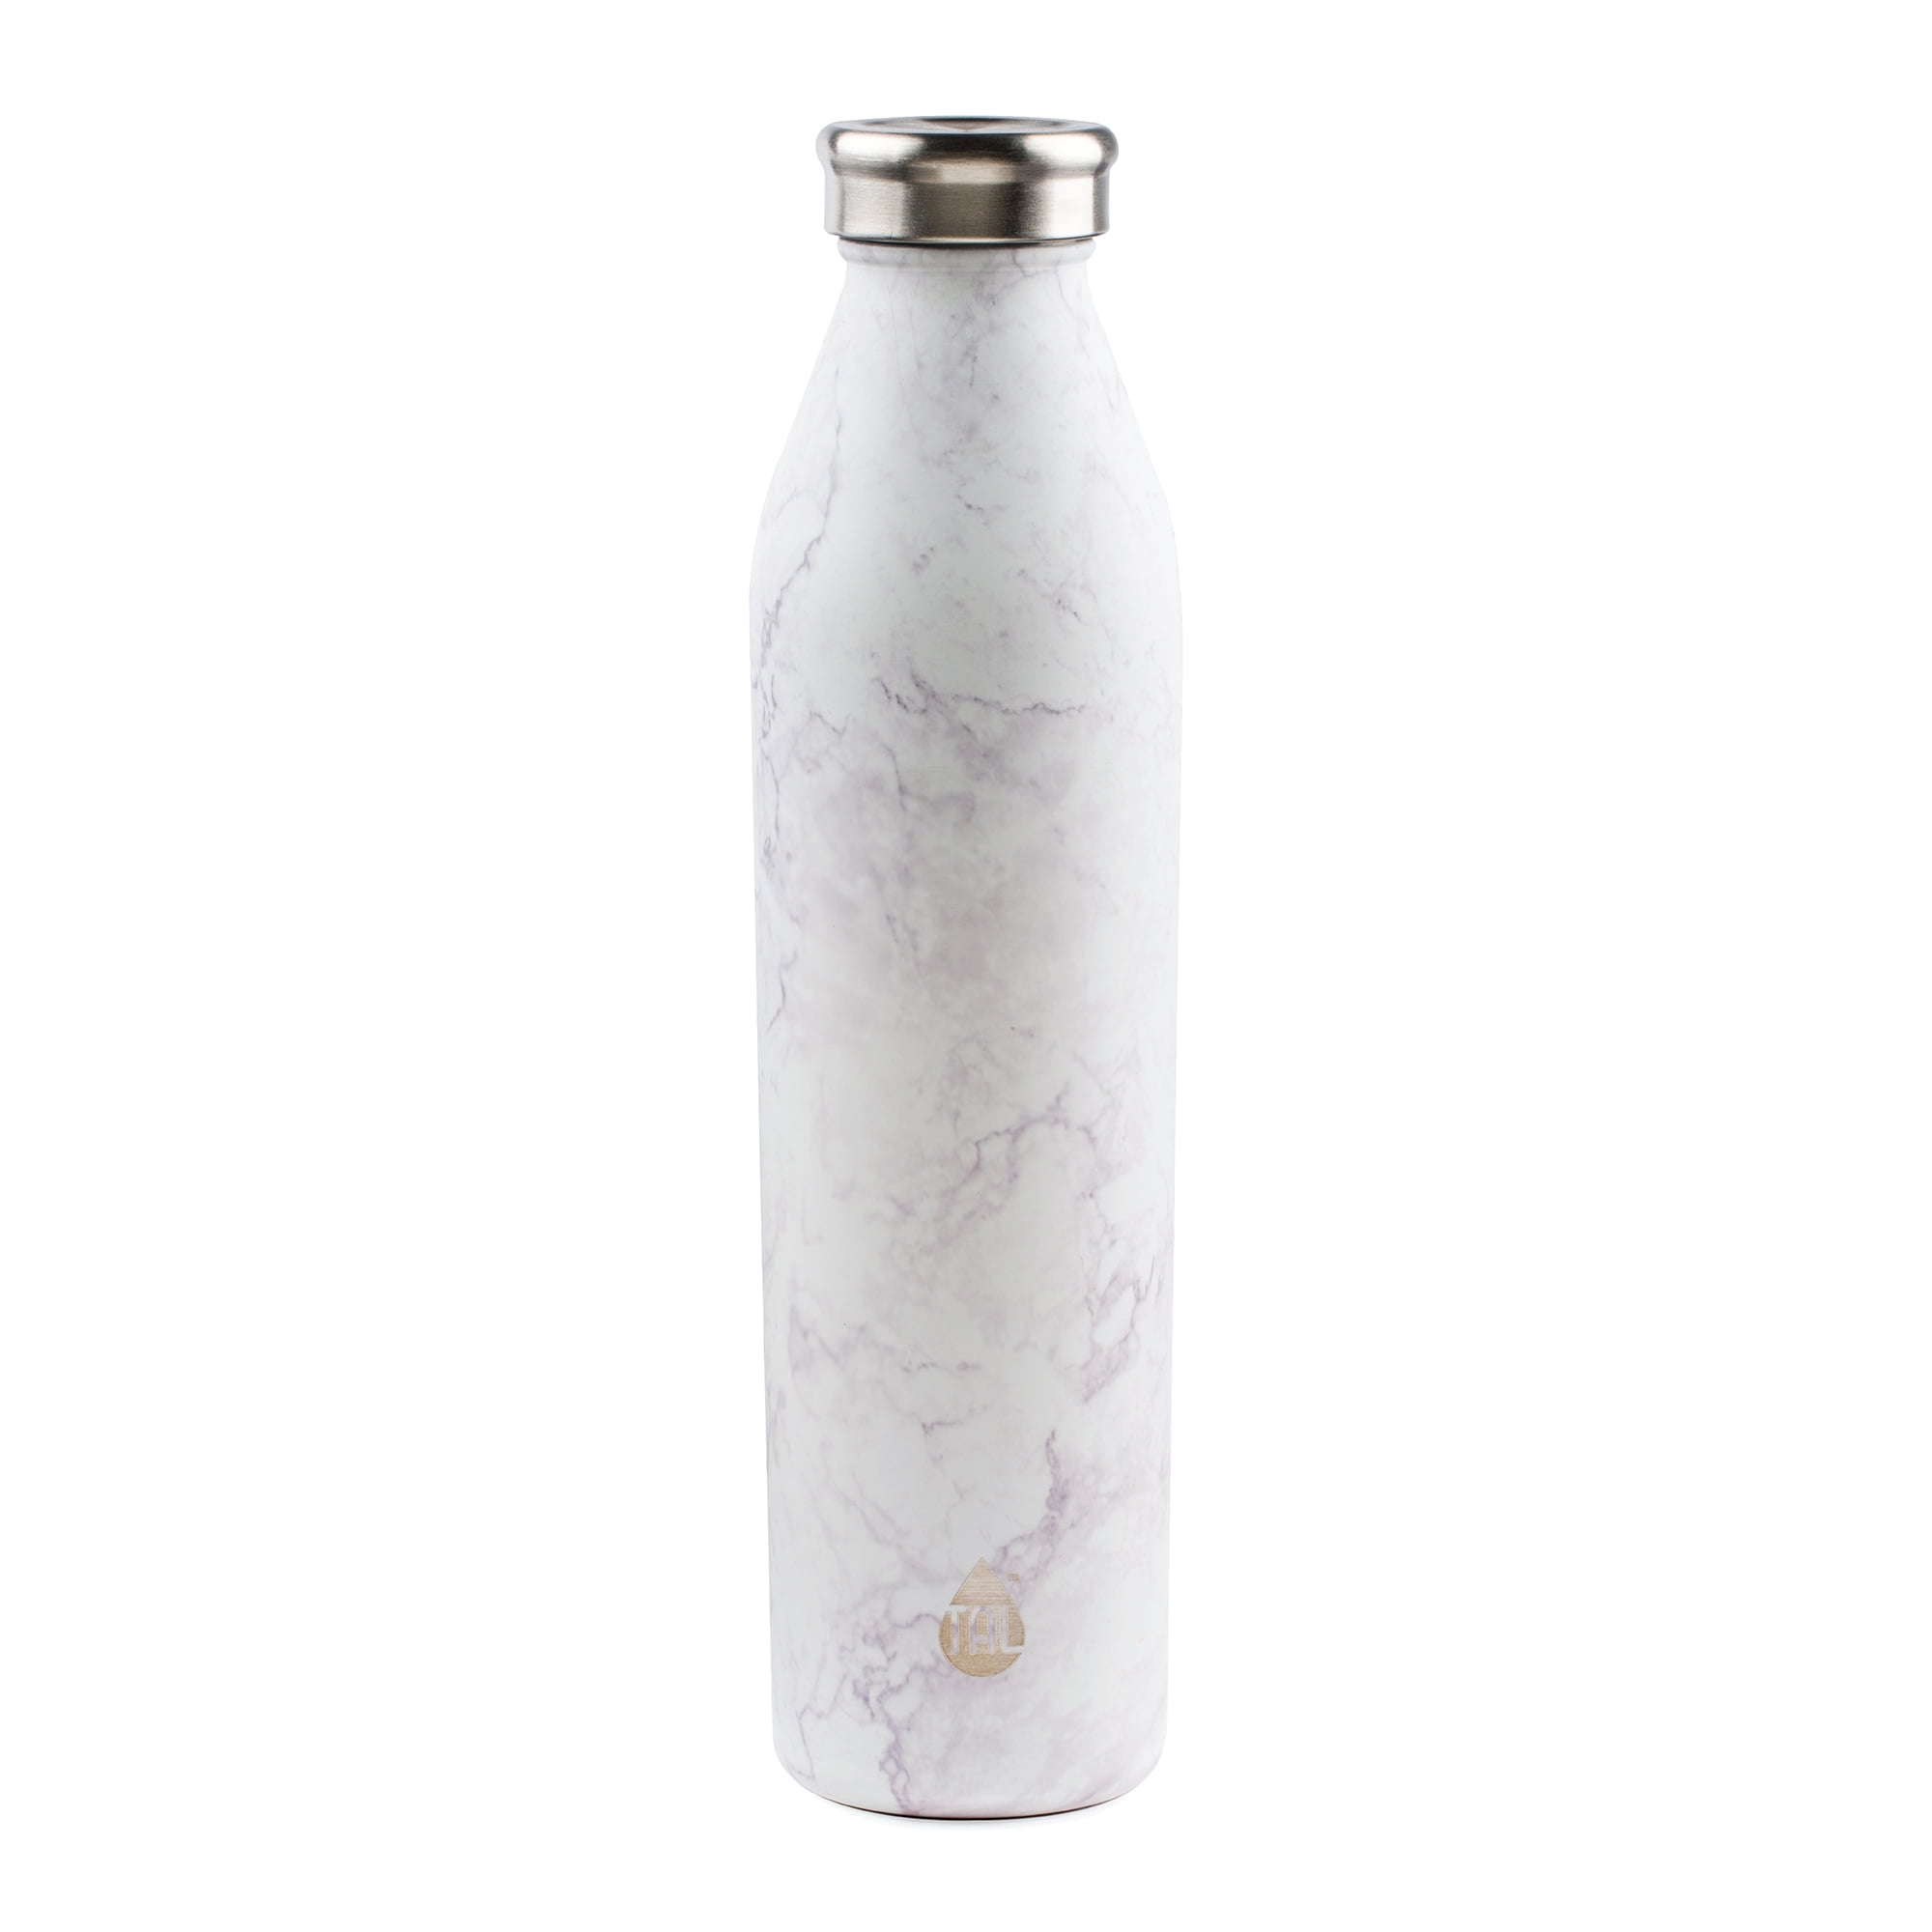 Slim Thin Stainless Steel Water Bottle – Best use in Travelling: 310 ml